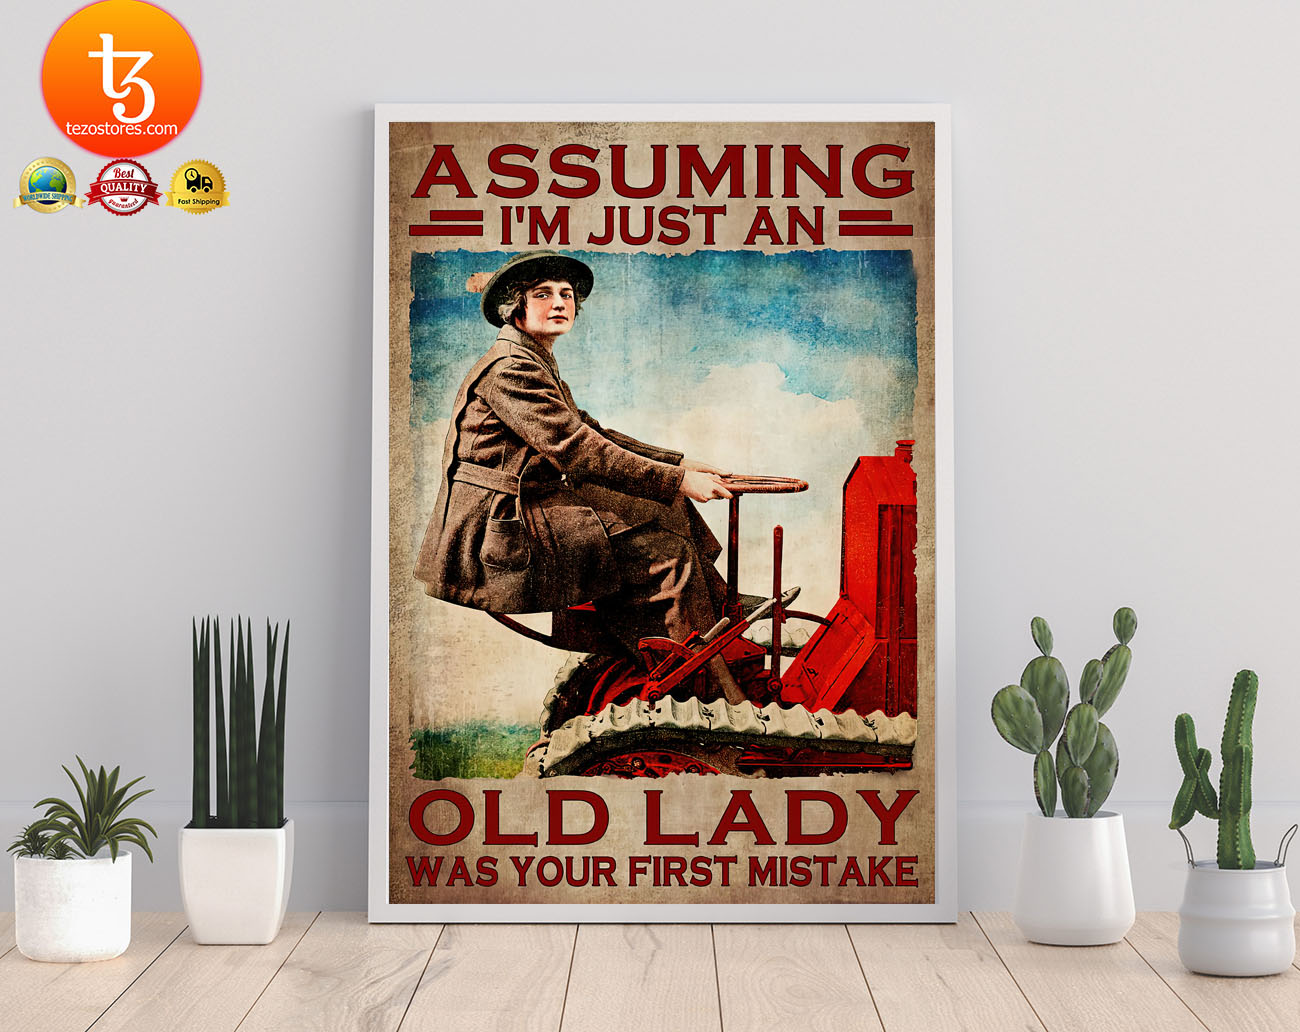 Assuming Im just an old lady was your first mistake poster2